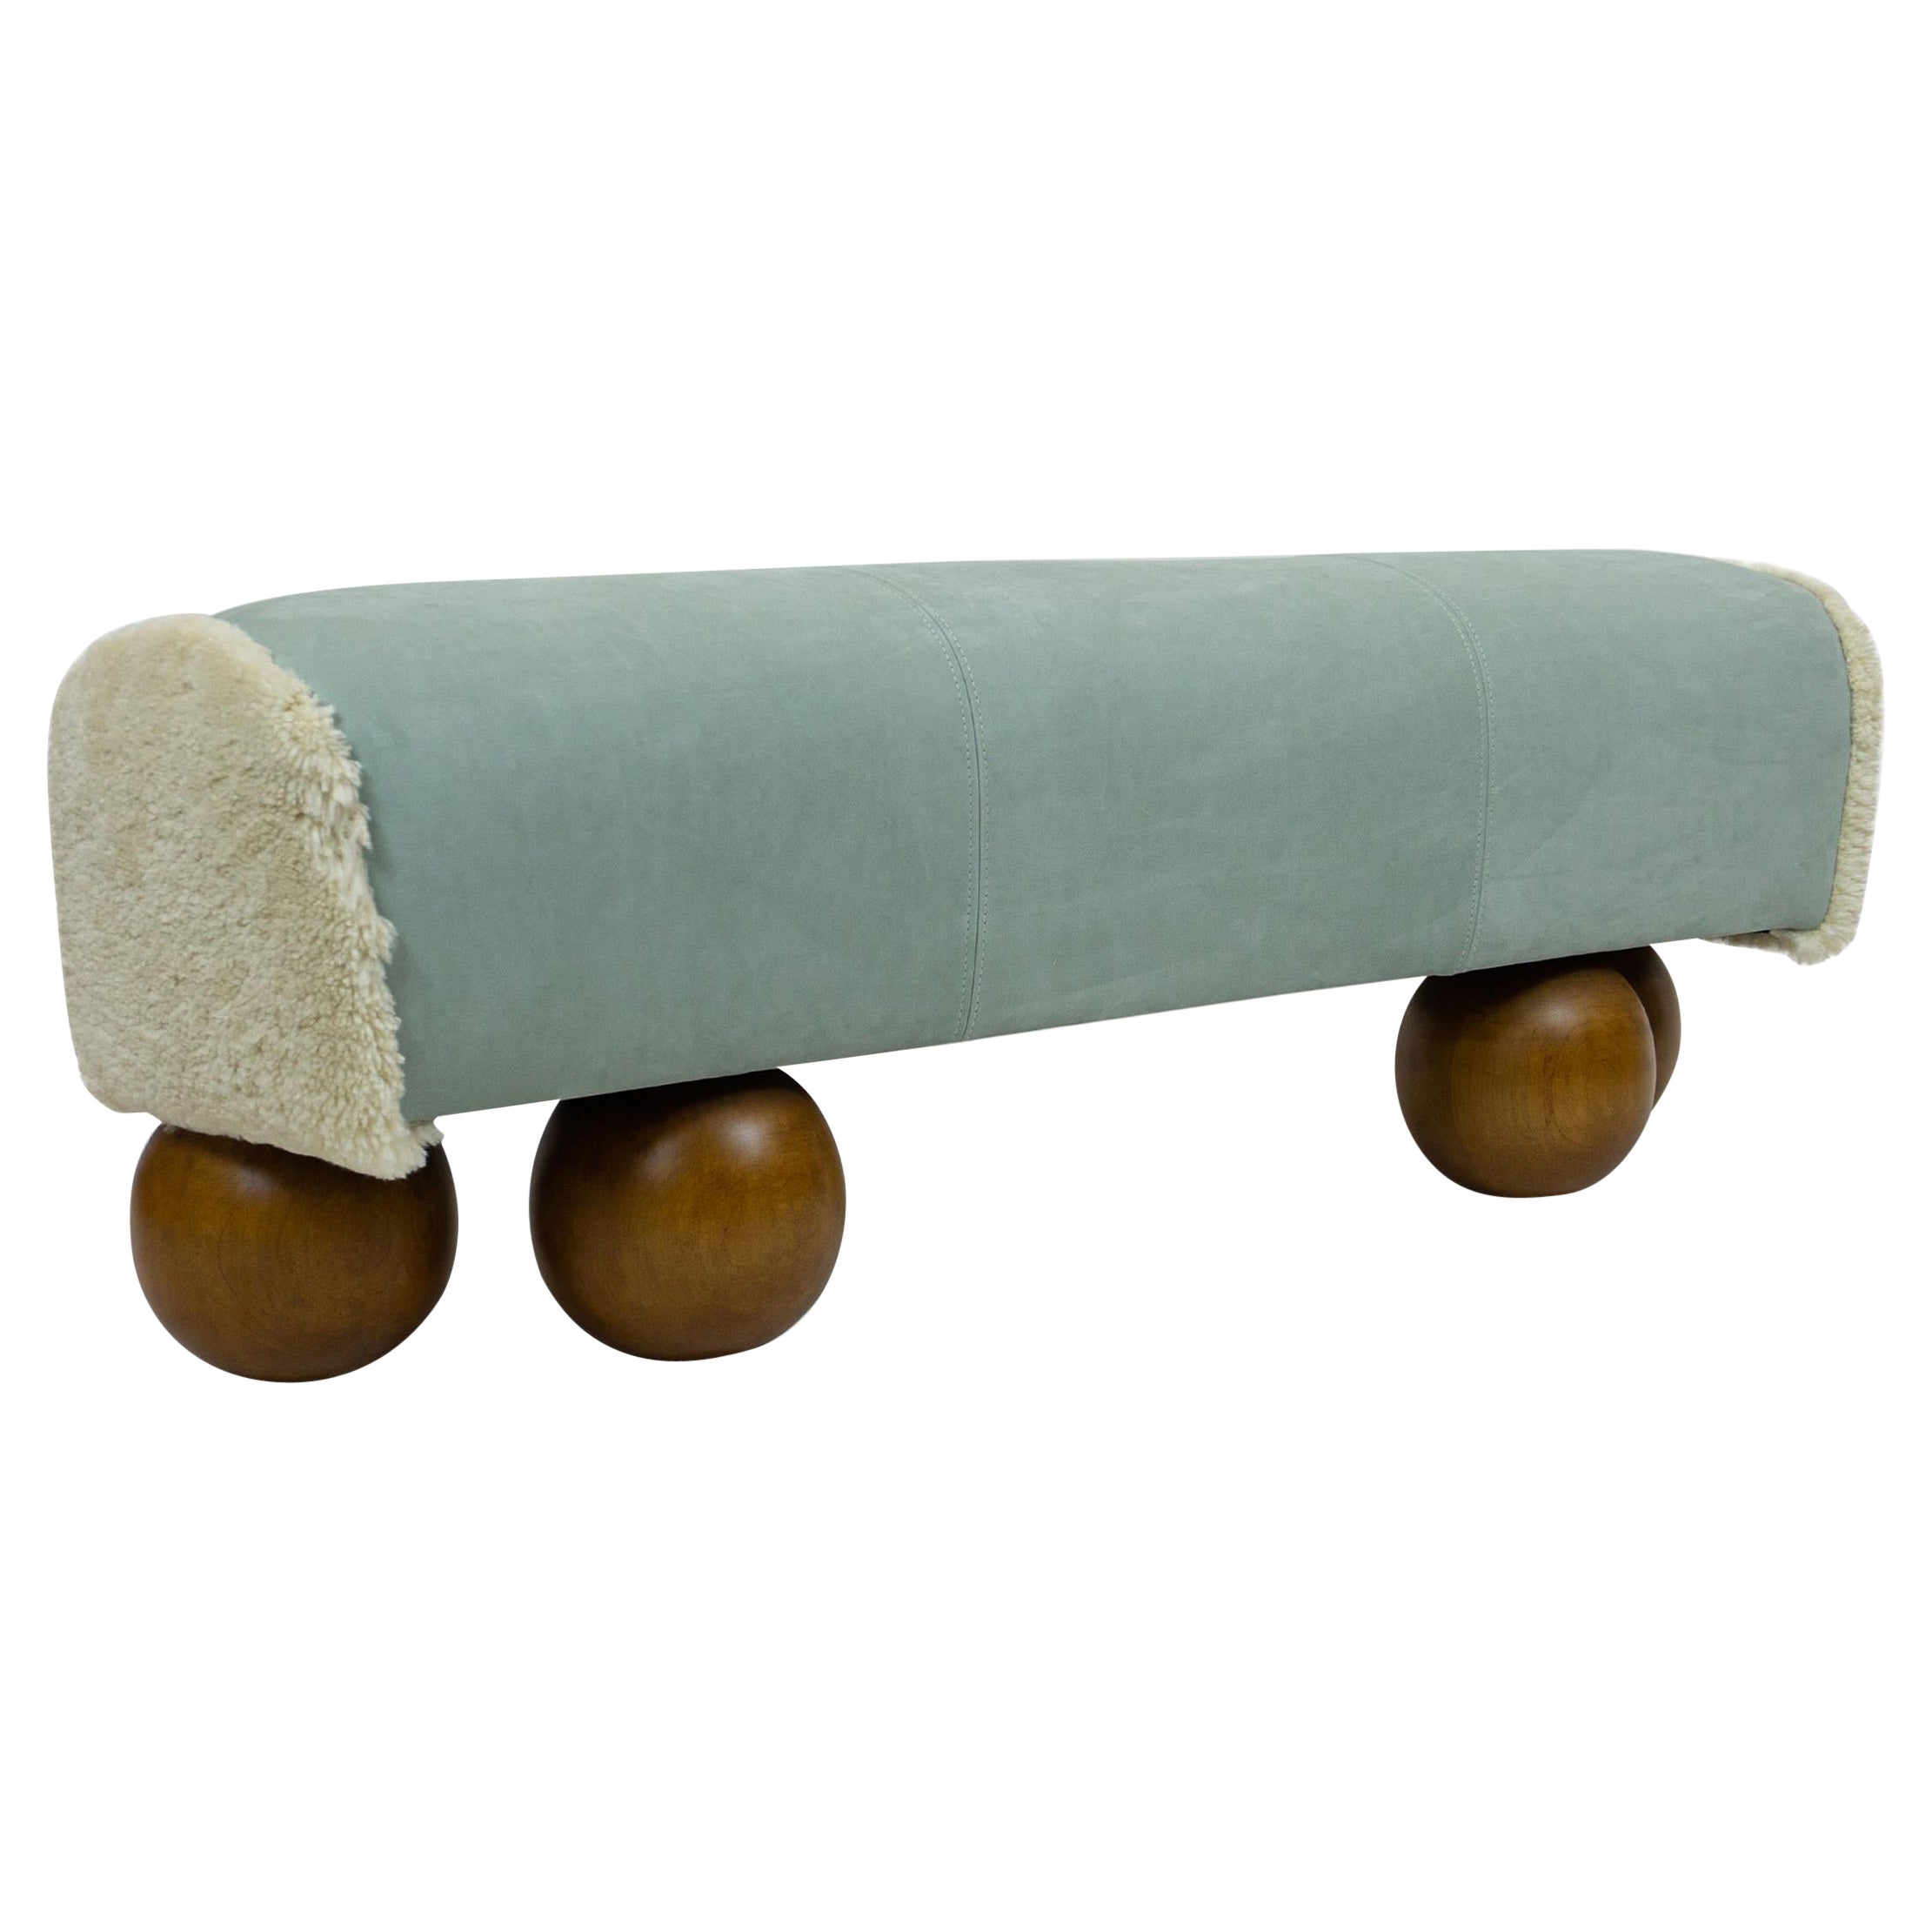 Walnut Ball Foot Bench with Leather Saddle Shaped Seat, Customizable For Sale